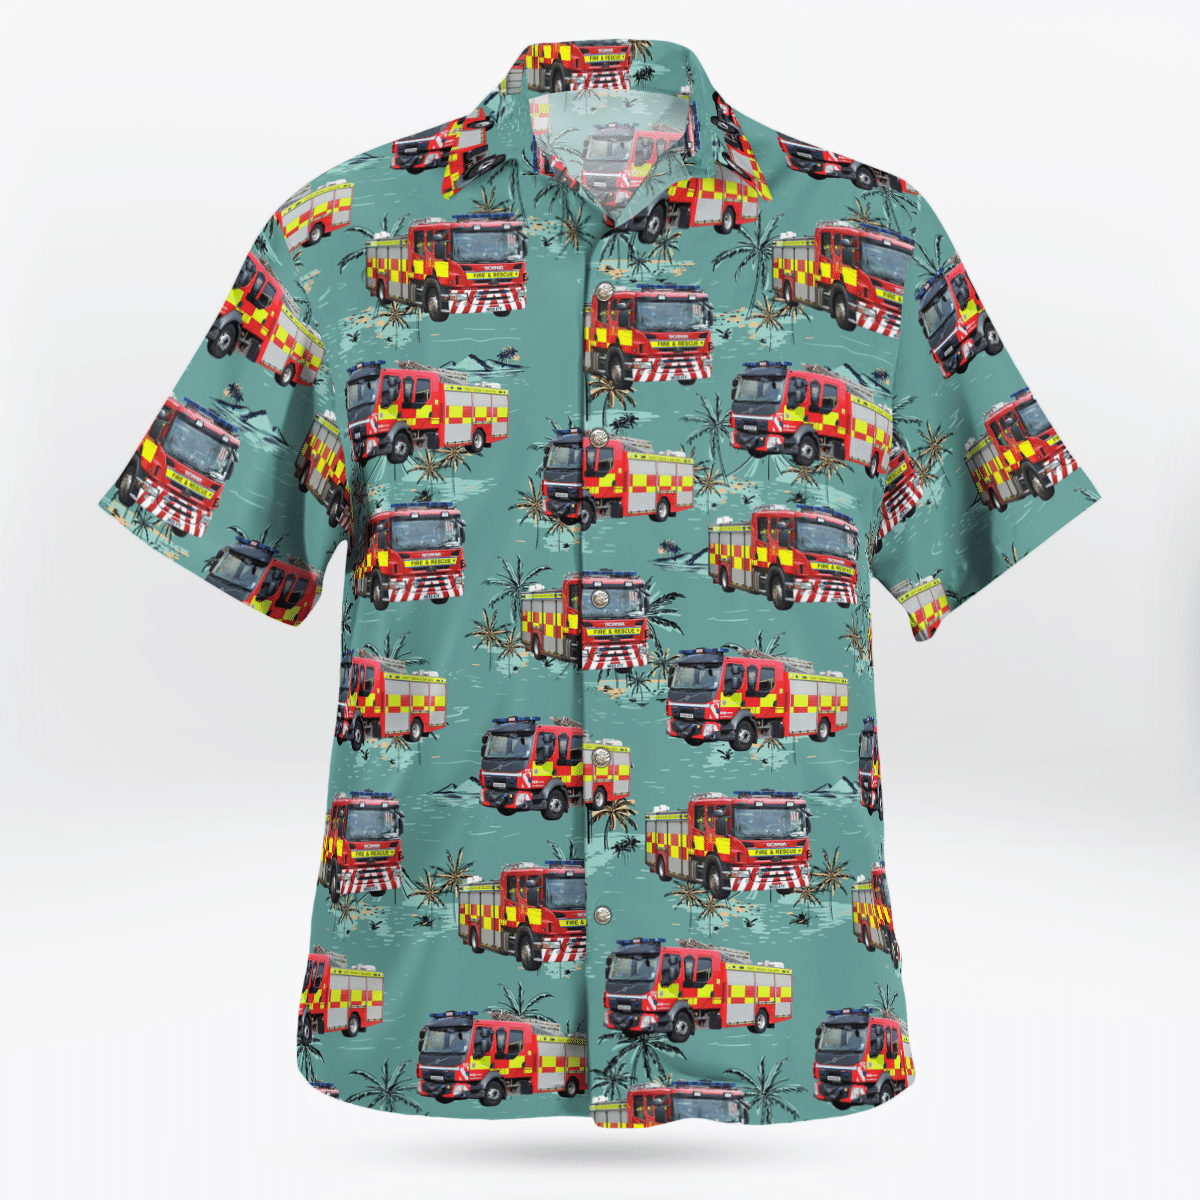 Hawaiian shirts never go out of style 240